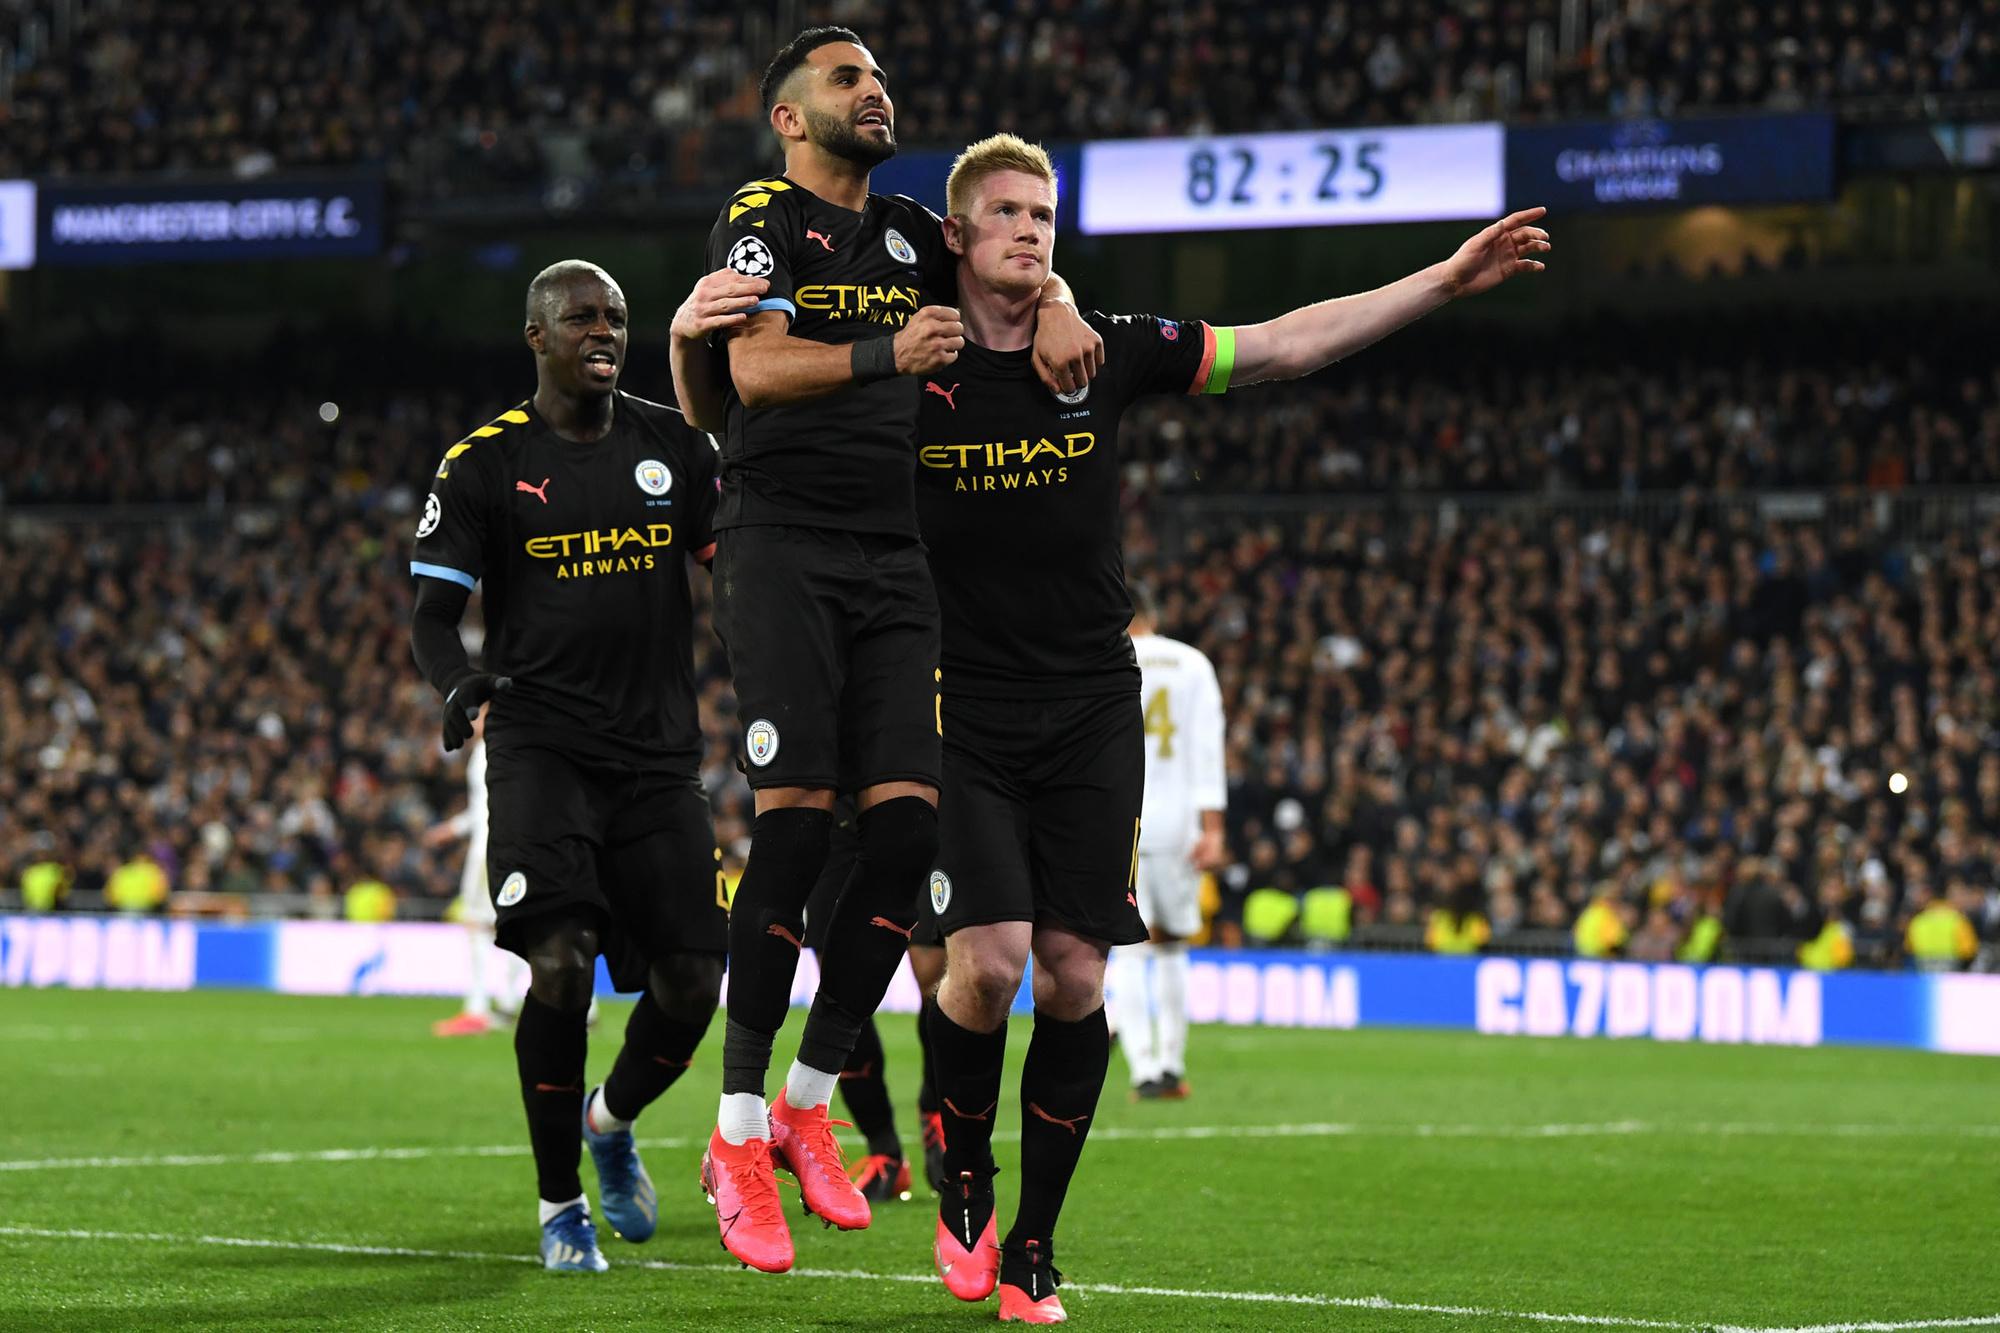 Kevin De Bruyne: 'I'm happy in Manchester'